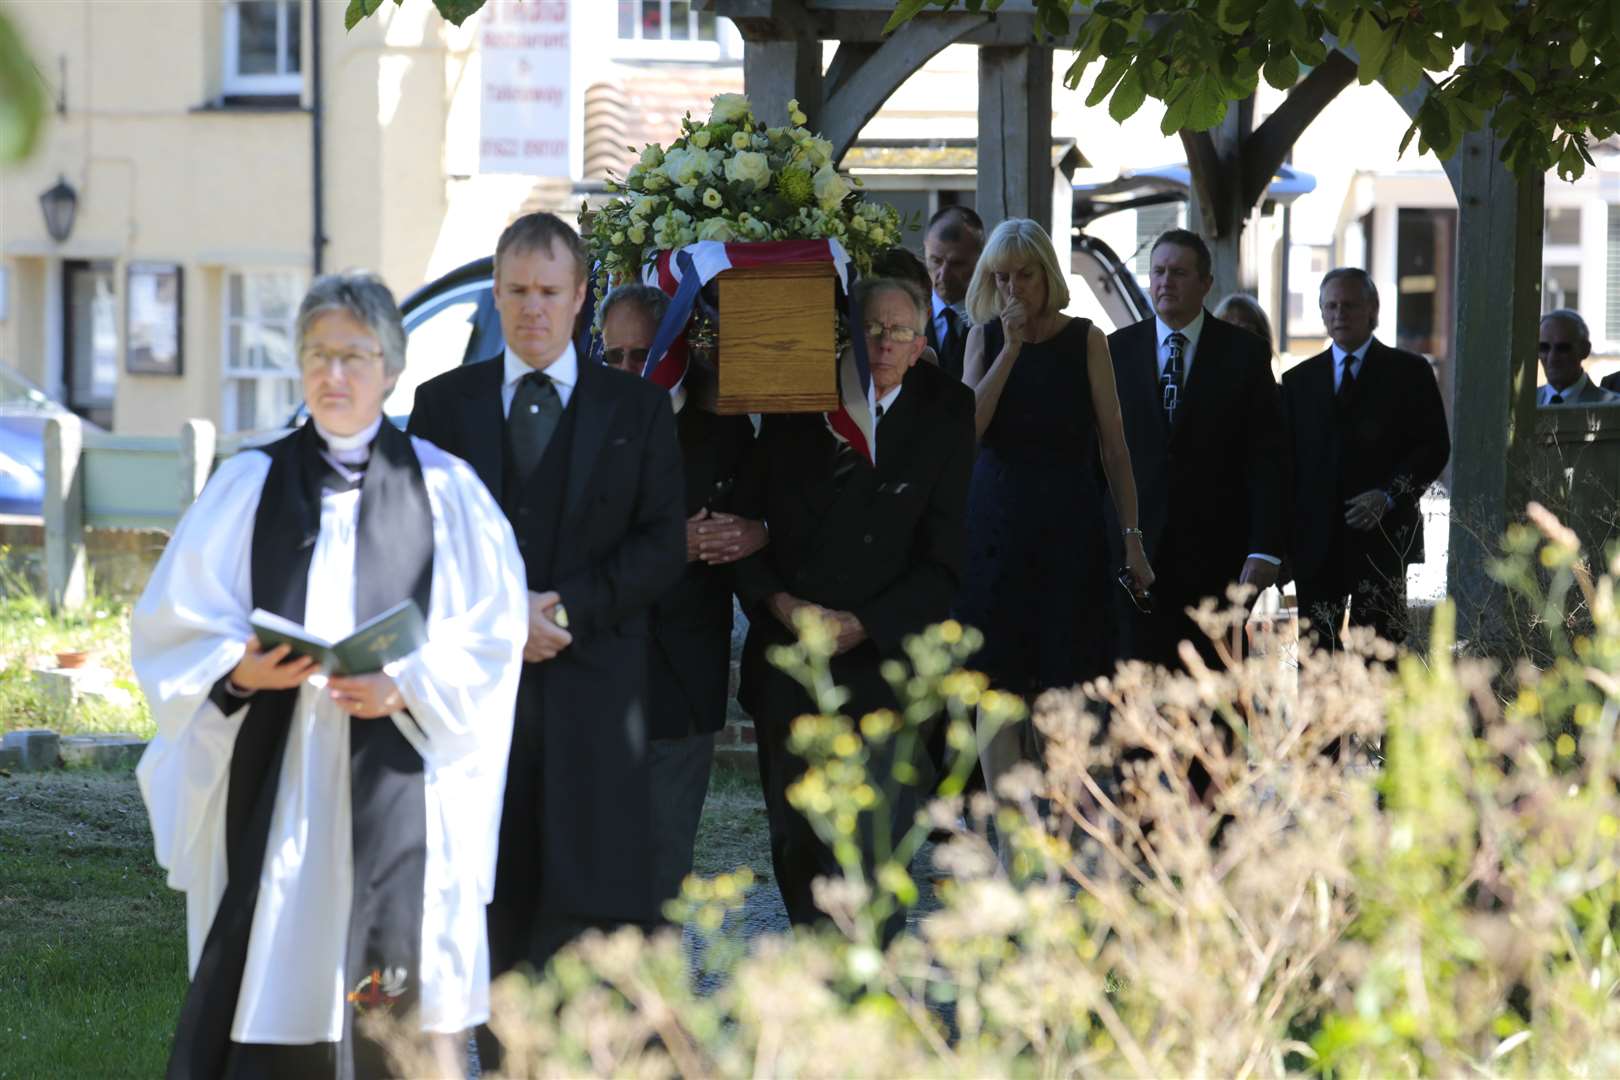 The Rev Fiona Haskett leads the coffin into the church